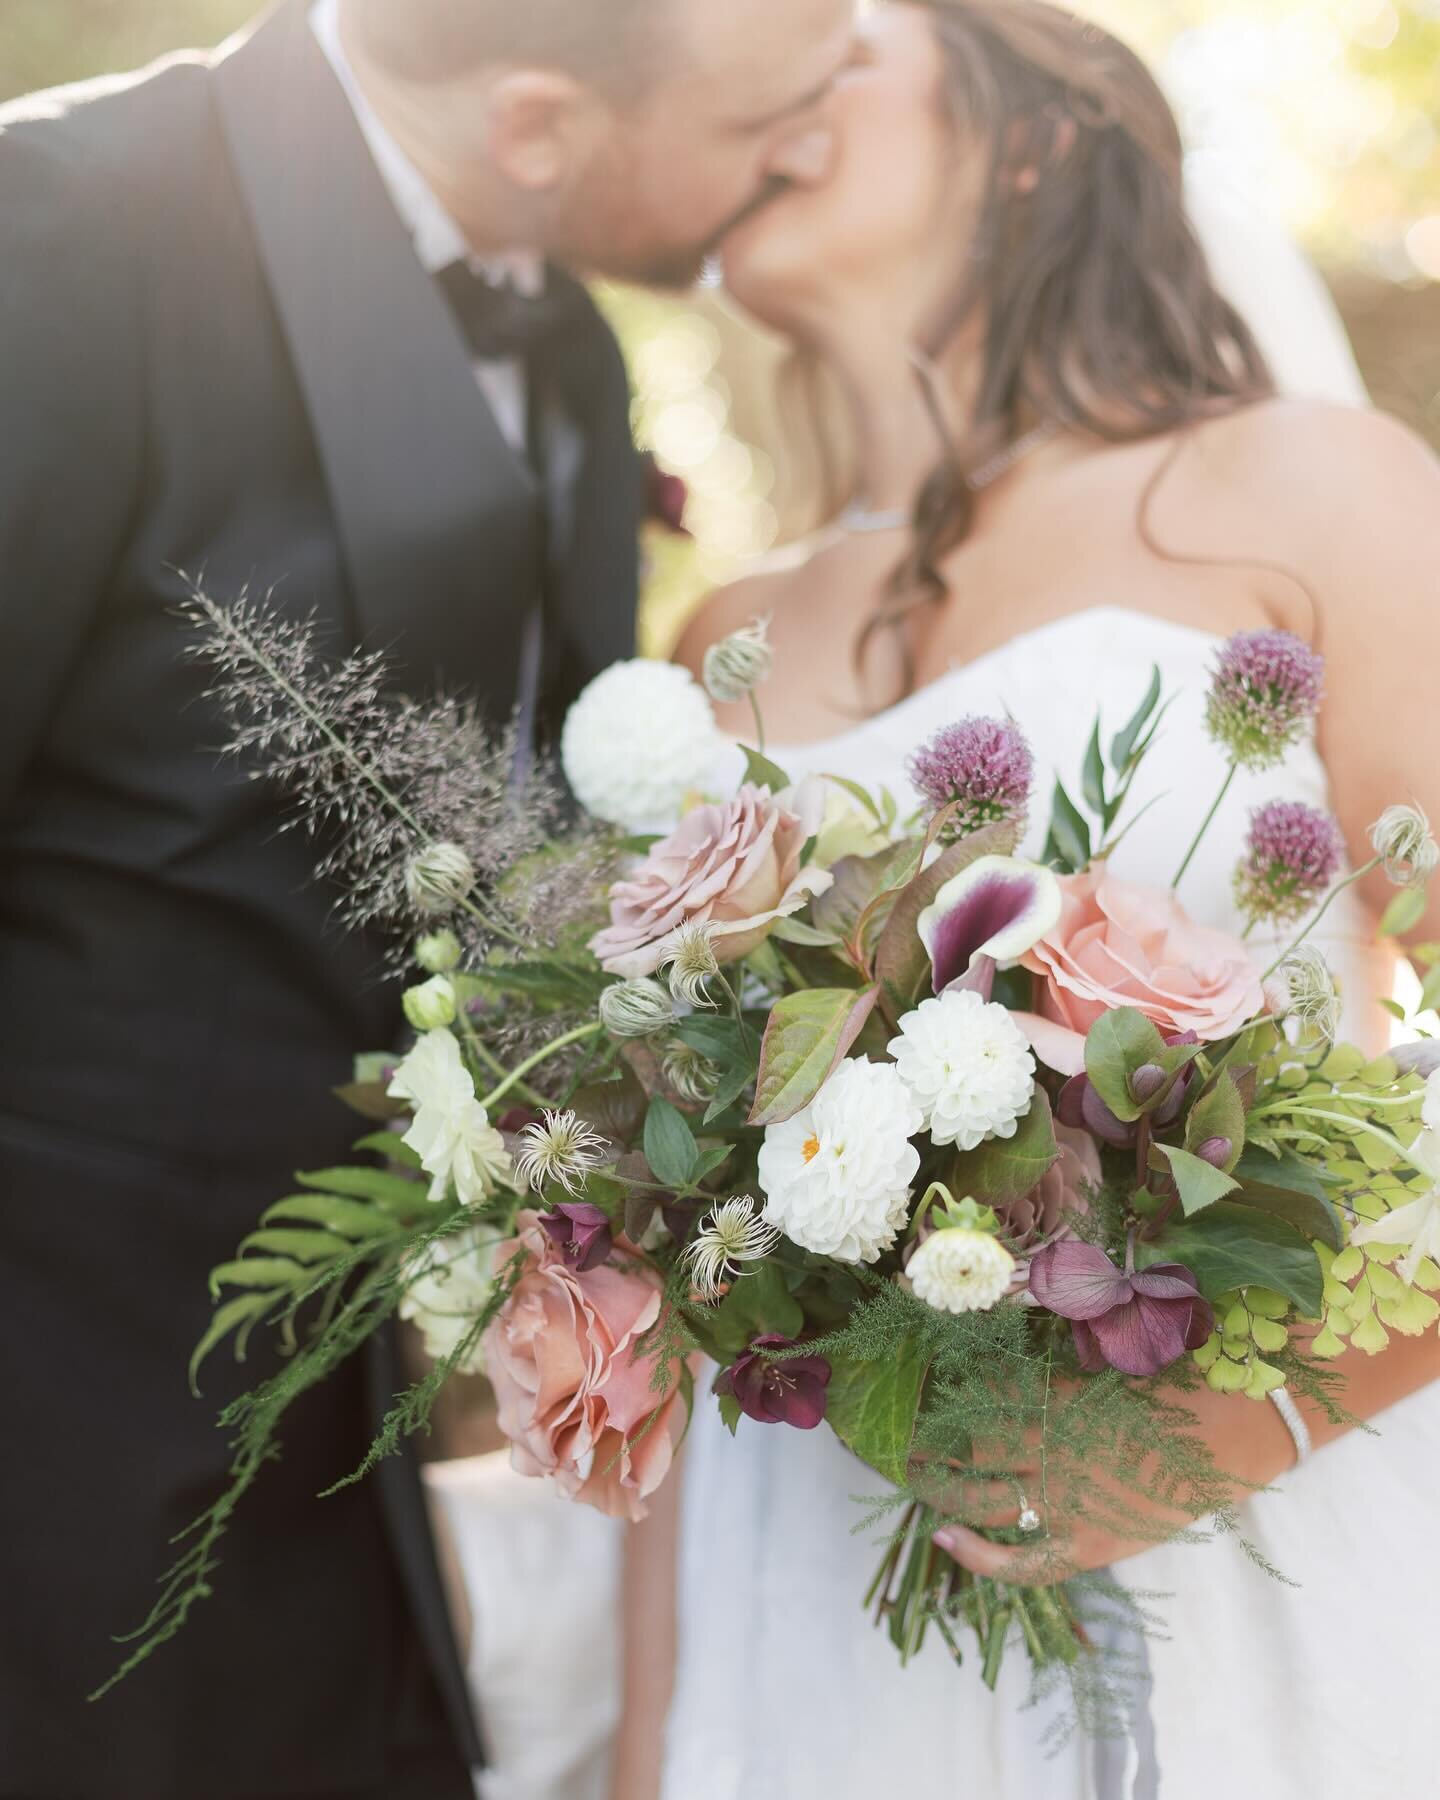 Liz wanted a whimsical, botanical feel to her bouquet - something unique but effortlessly elegant. Hellebore, locally grown dahlias, and funky textural elements like clematis pods and explosion grass give that lush garden look. 
&bull;
Planner: @jess